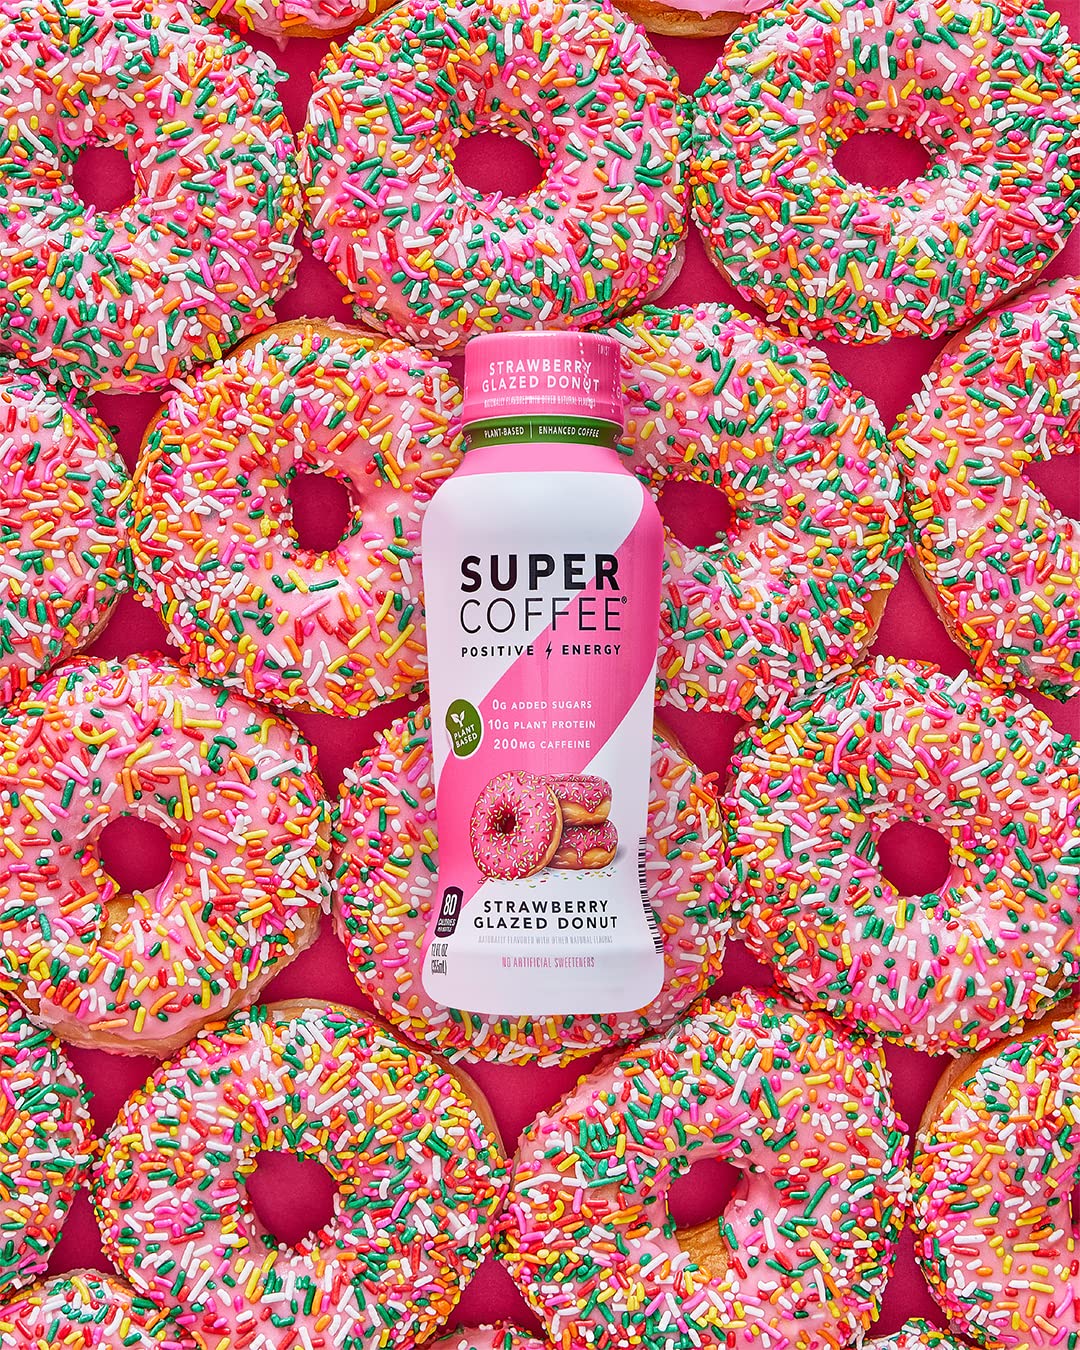 Super Coffee, Plant Based Keto Protein Coffee (0g Added Sugar, 10g Pea Protein, 80 Calories) [Strawberry Glazed Donut] 12 Fl Oz, 12 Pack | Iced Smart Coffee Drinks